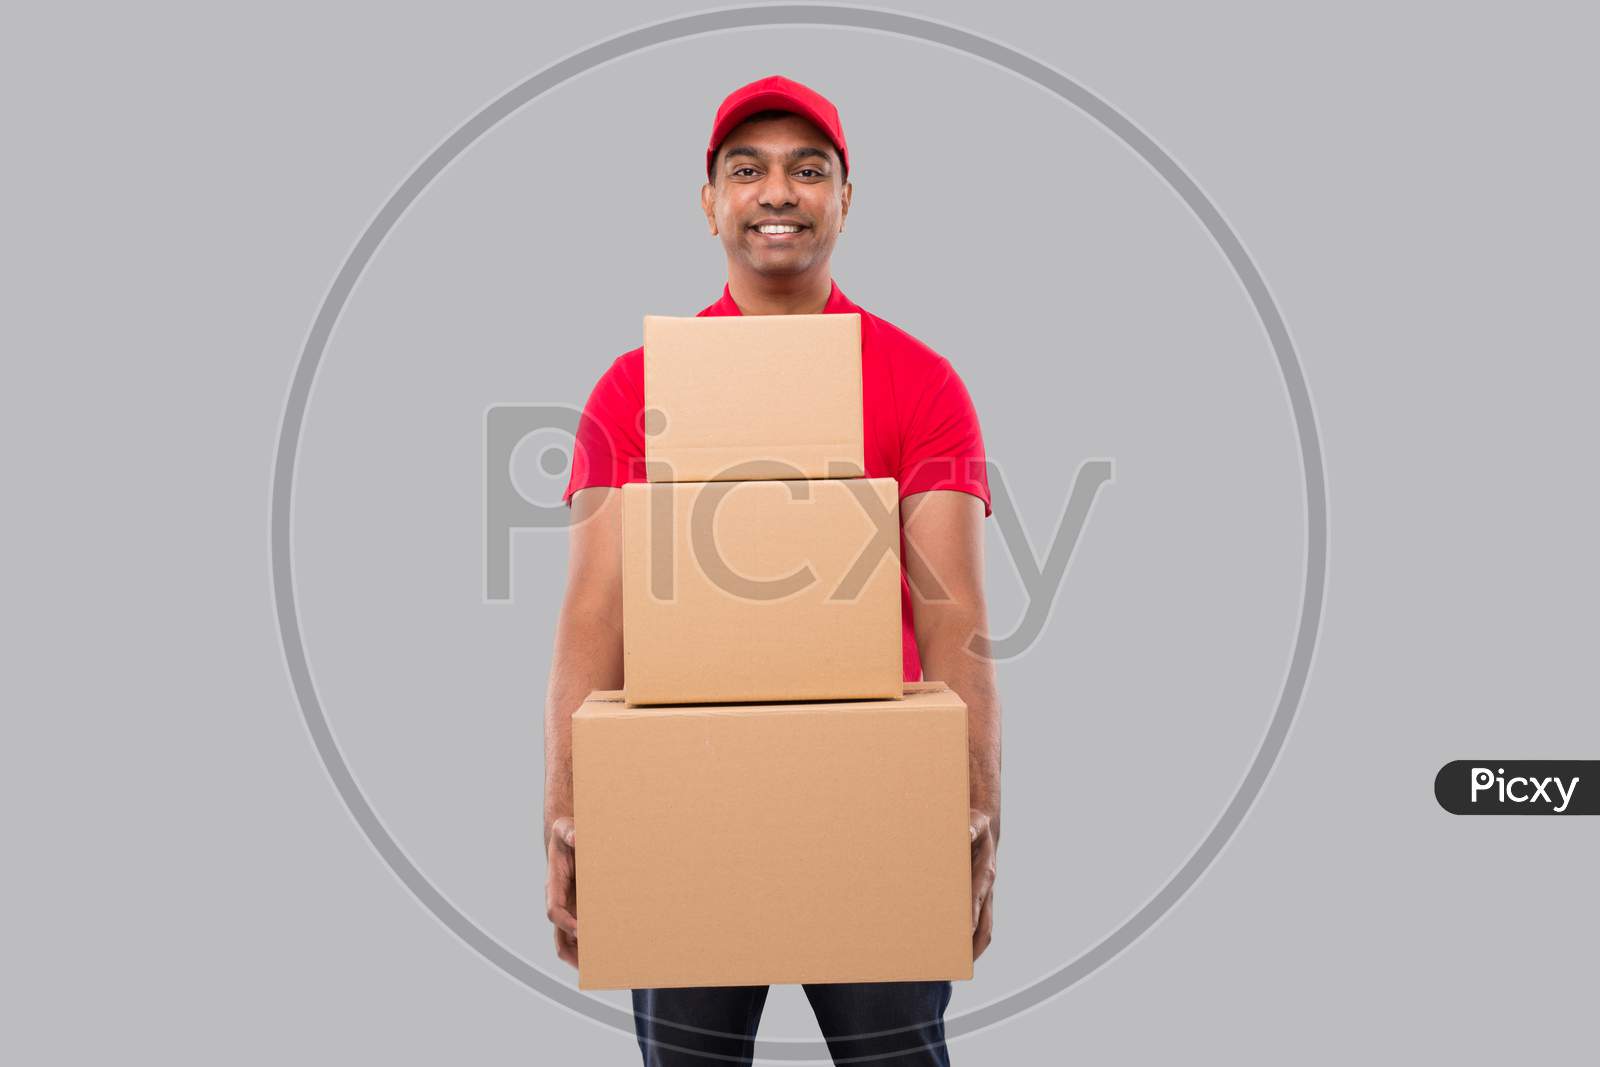 Delivery Man Holding Carton Boxes Isolated. Indian Delivery Boy Smiling With Boxes In Hands